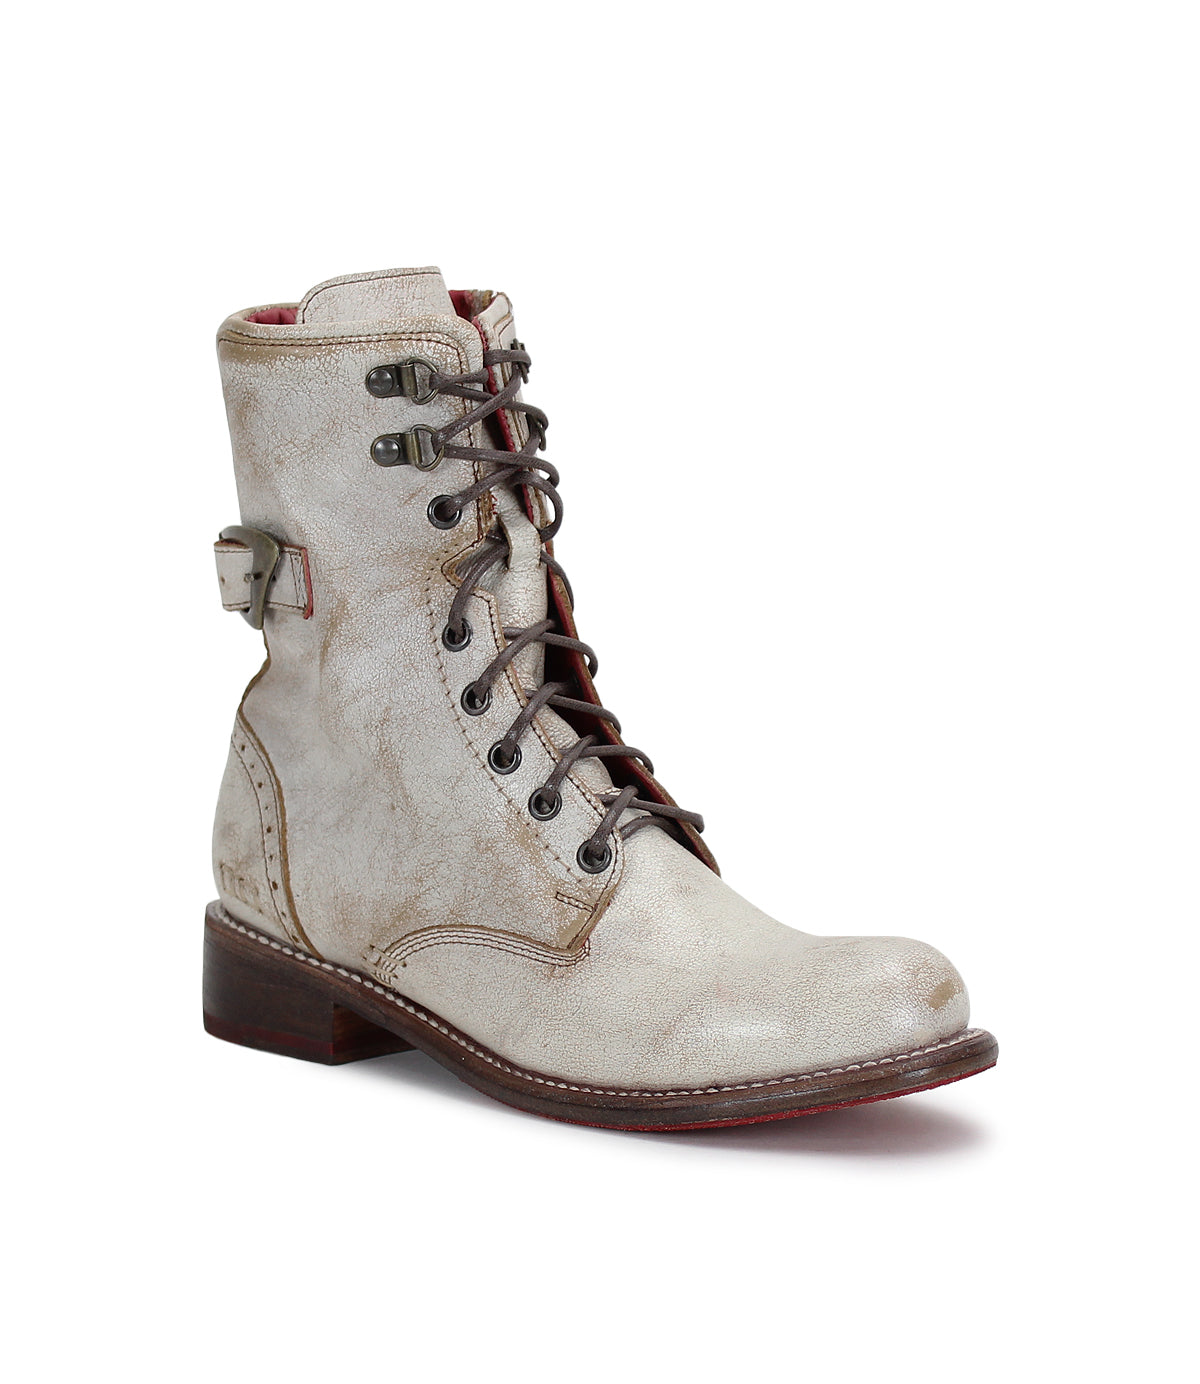 A women's white combat boot with lace ups called "Anne" by Bed Stu.